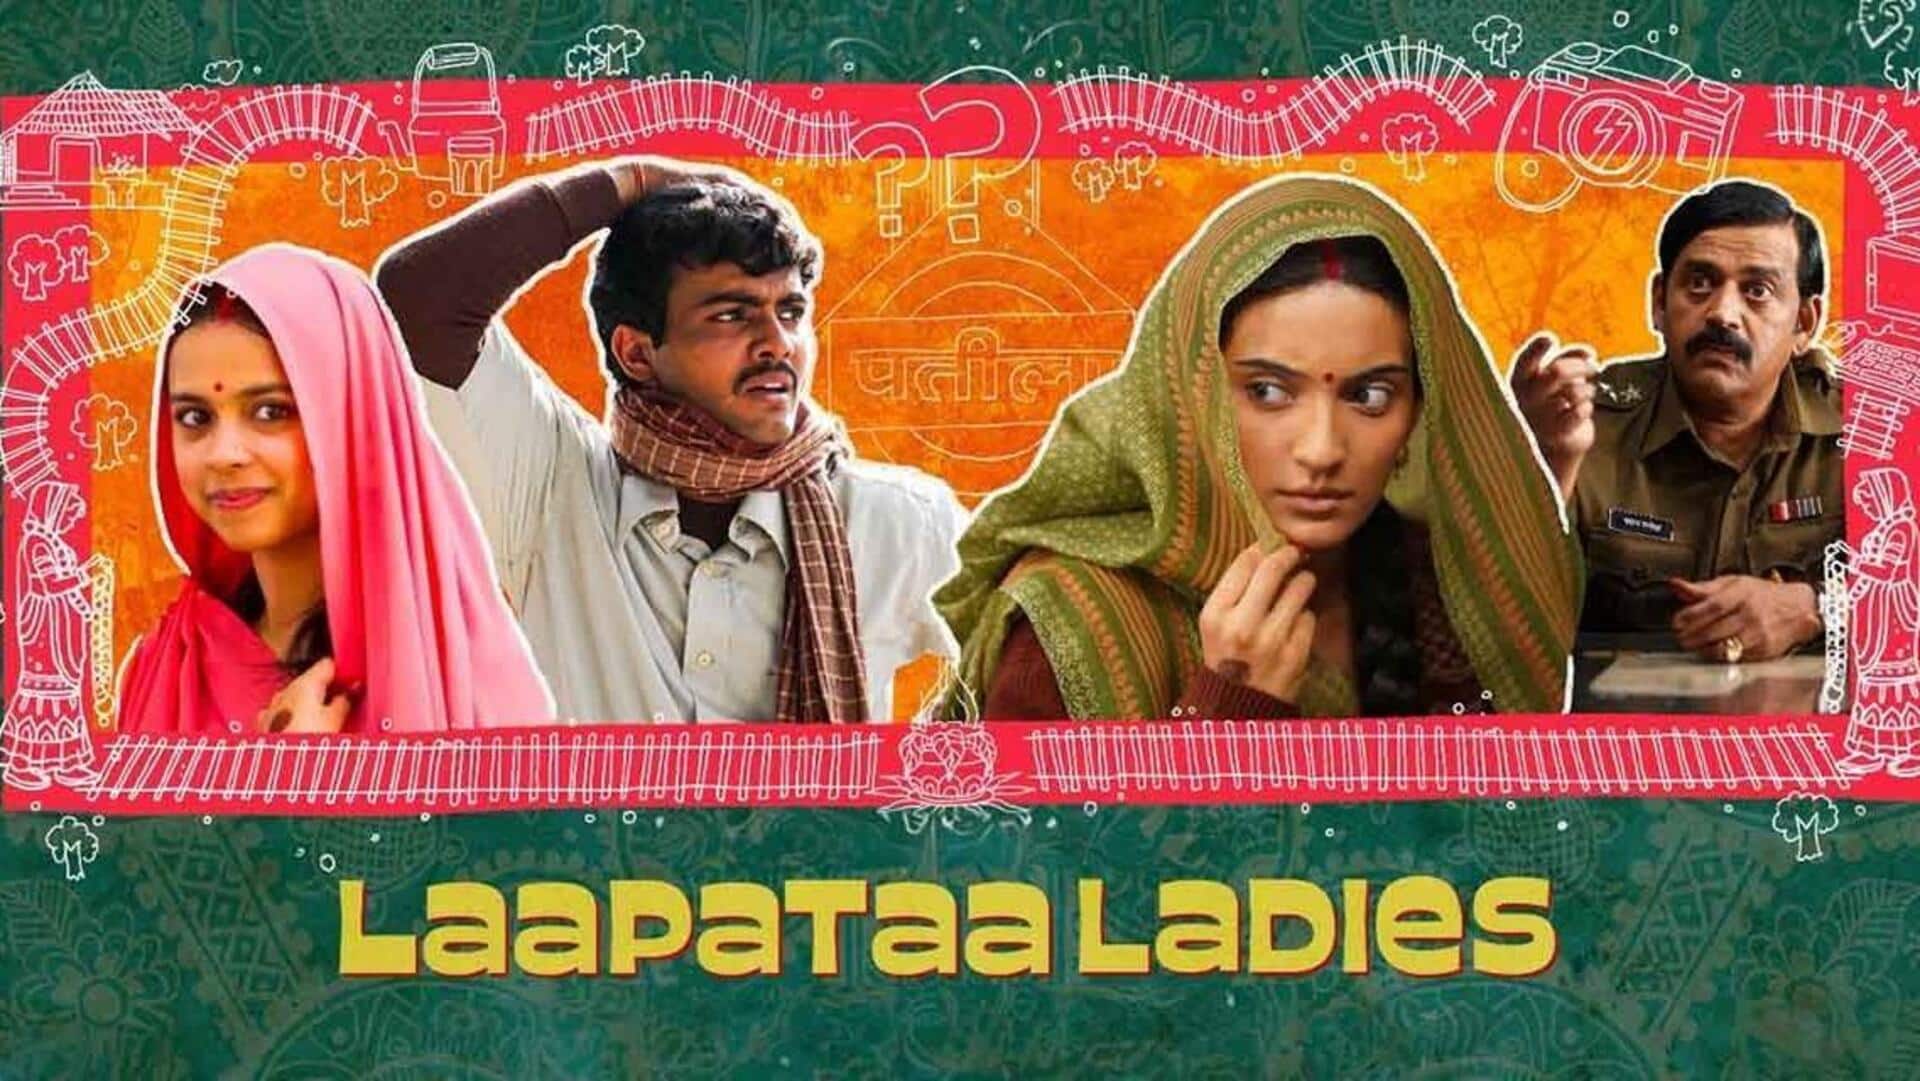 Box office collection: 'Laapataa Ladies' shows minuscule growth on weekdays